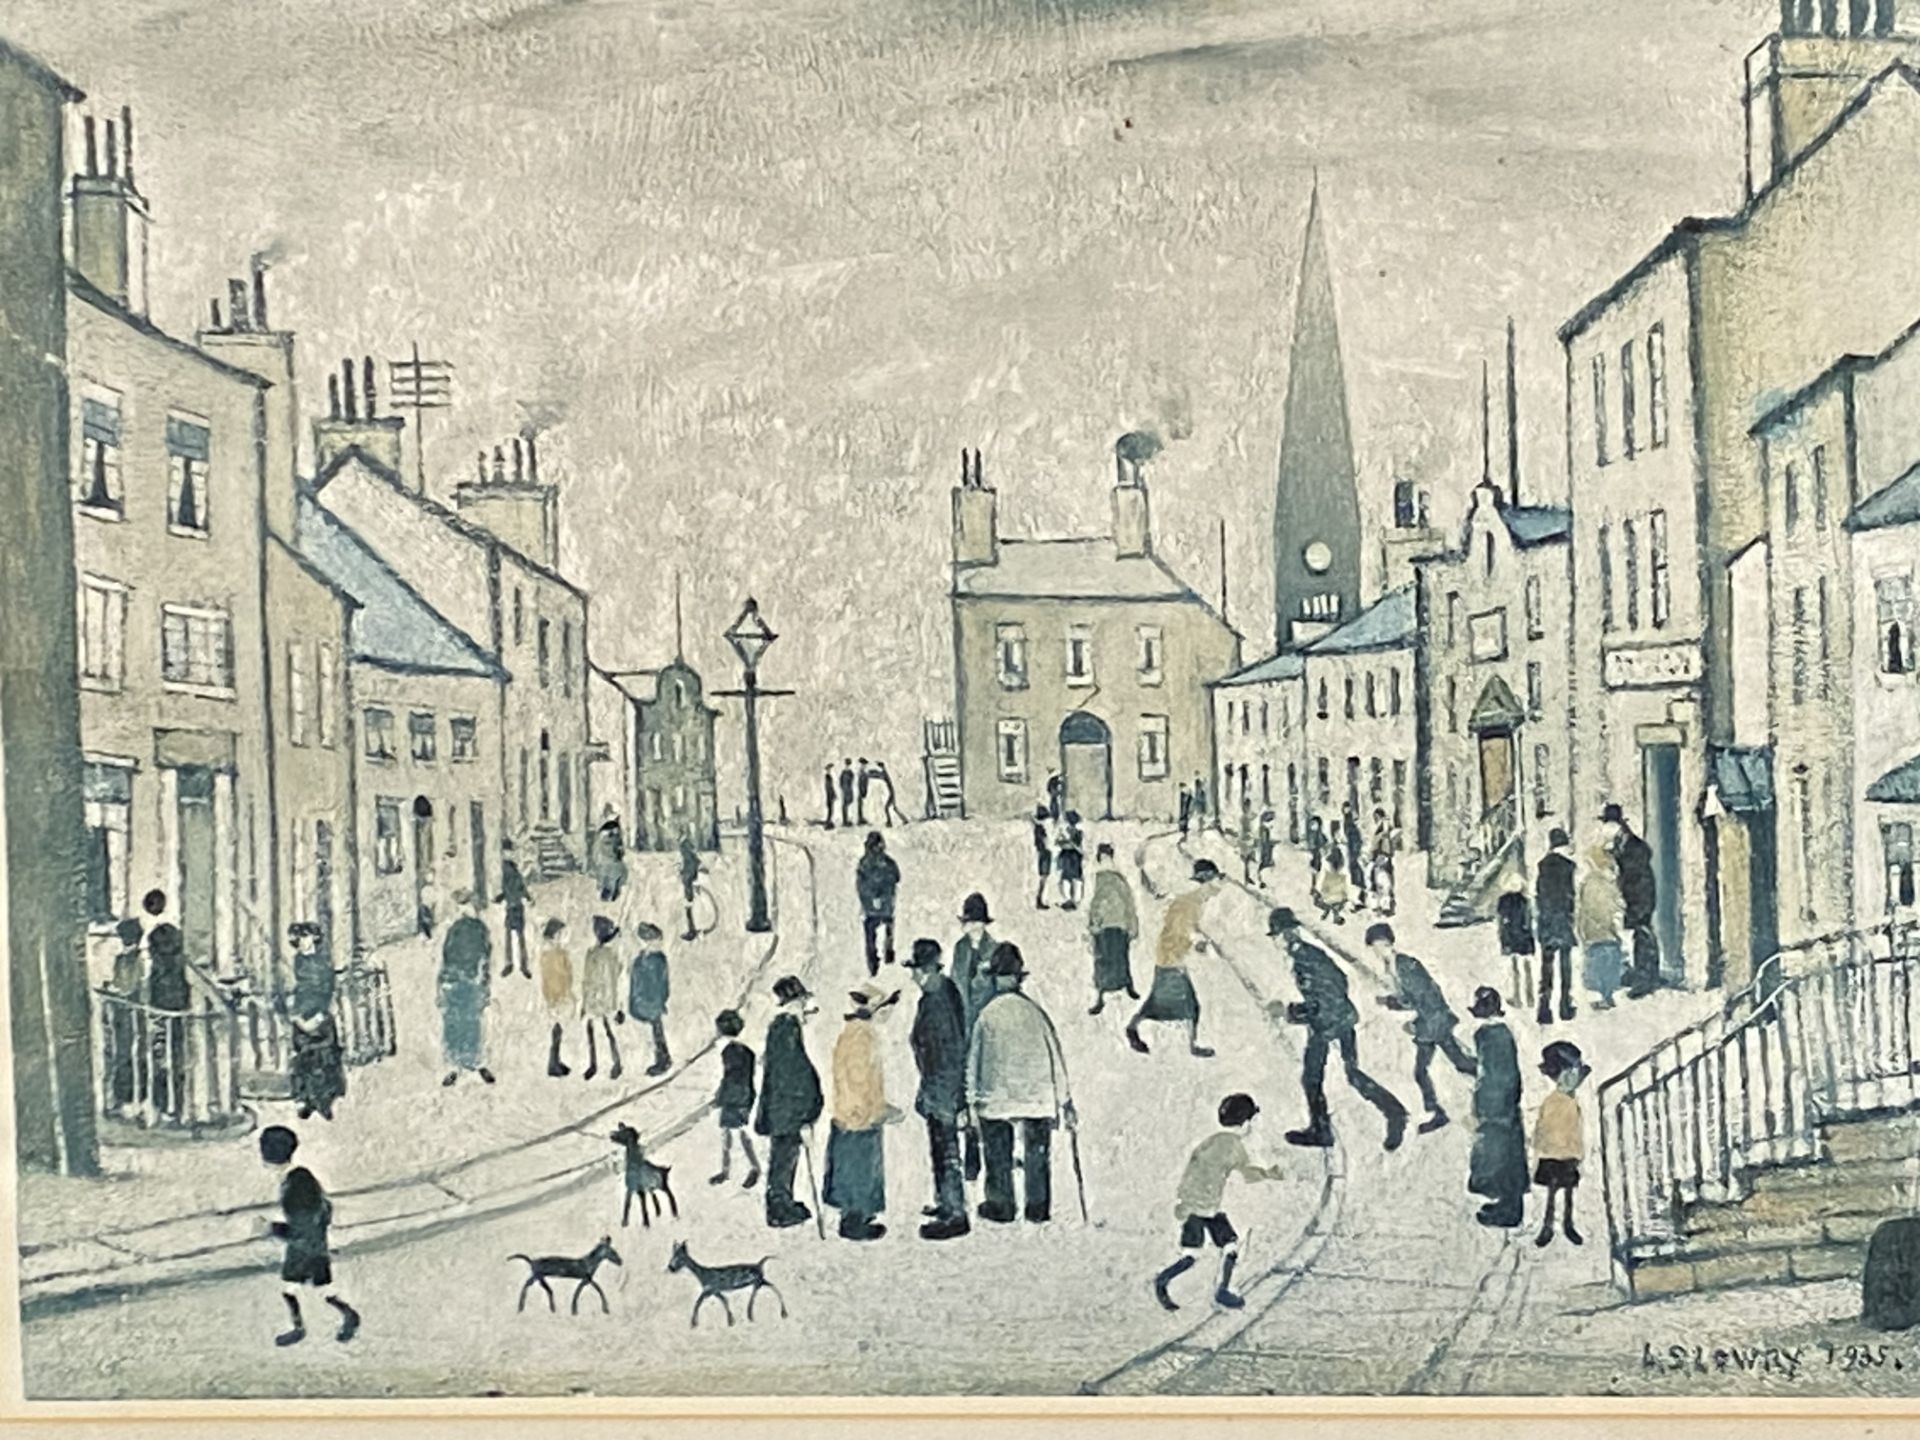 FG lithographic print by L S Lowry - Image 3 of 3